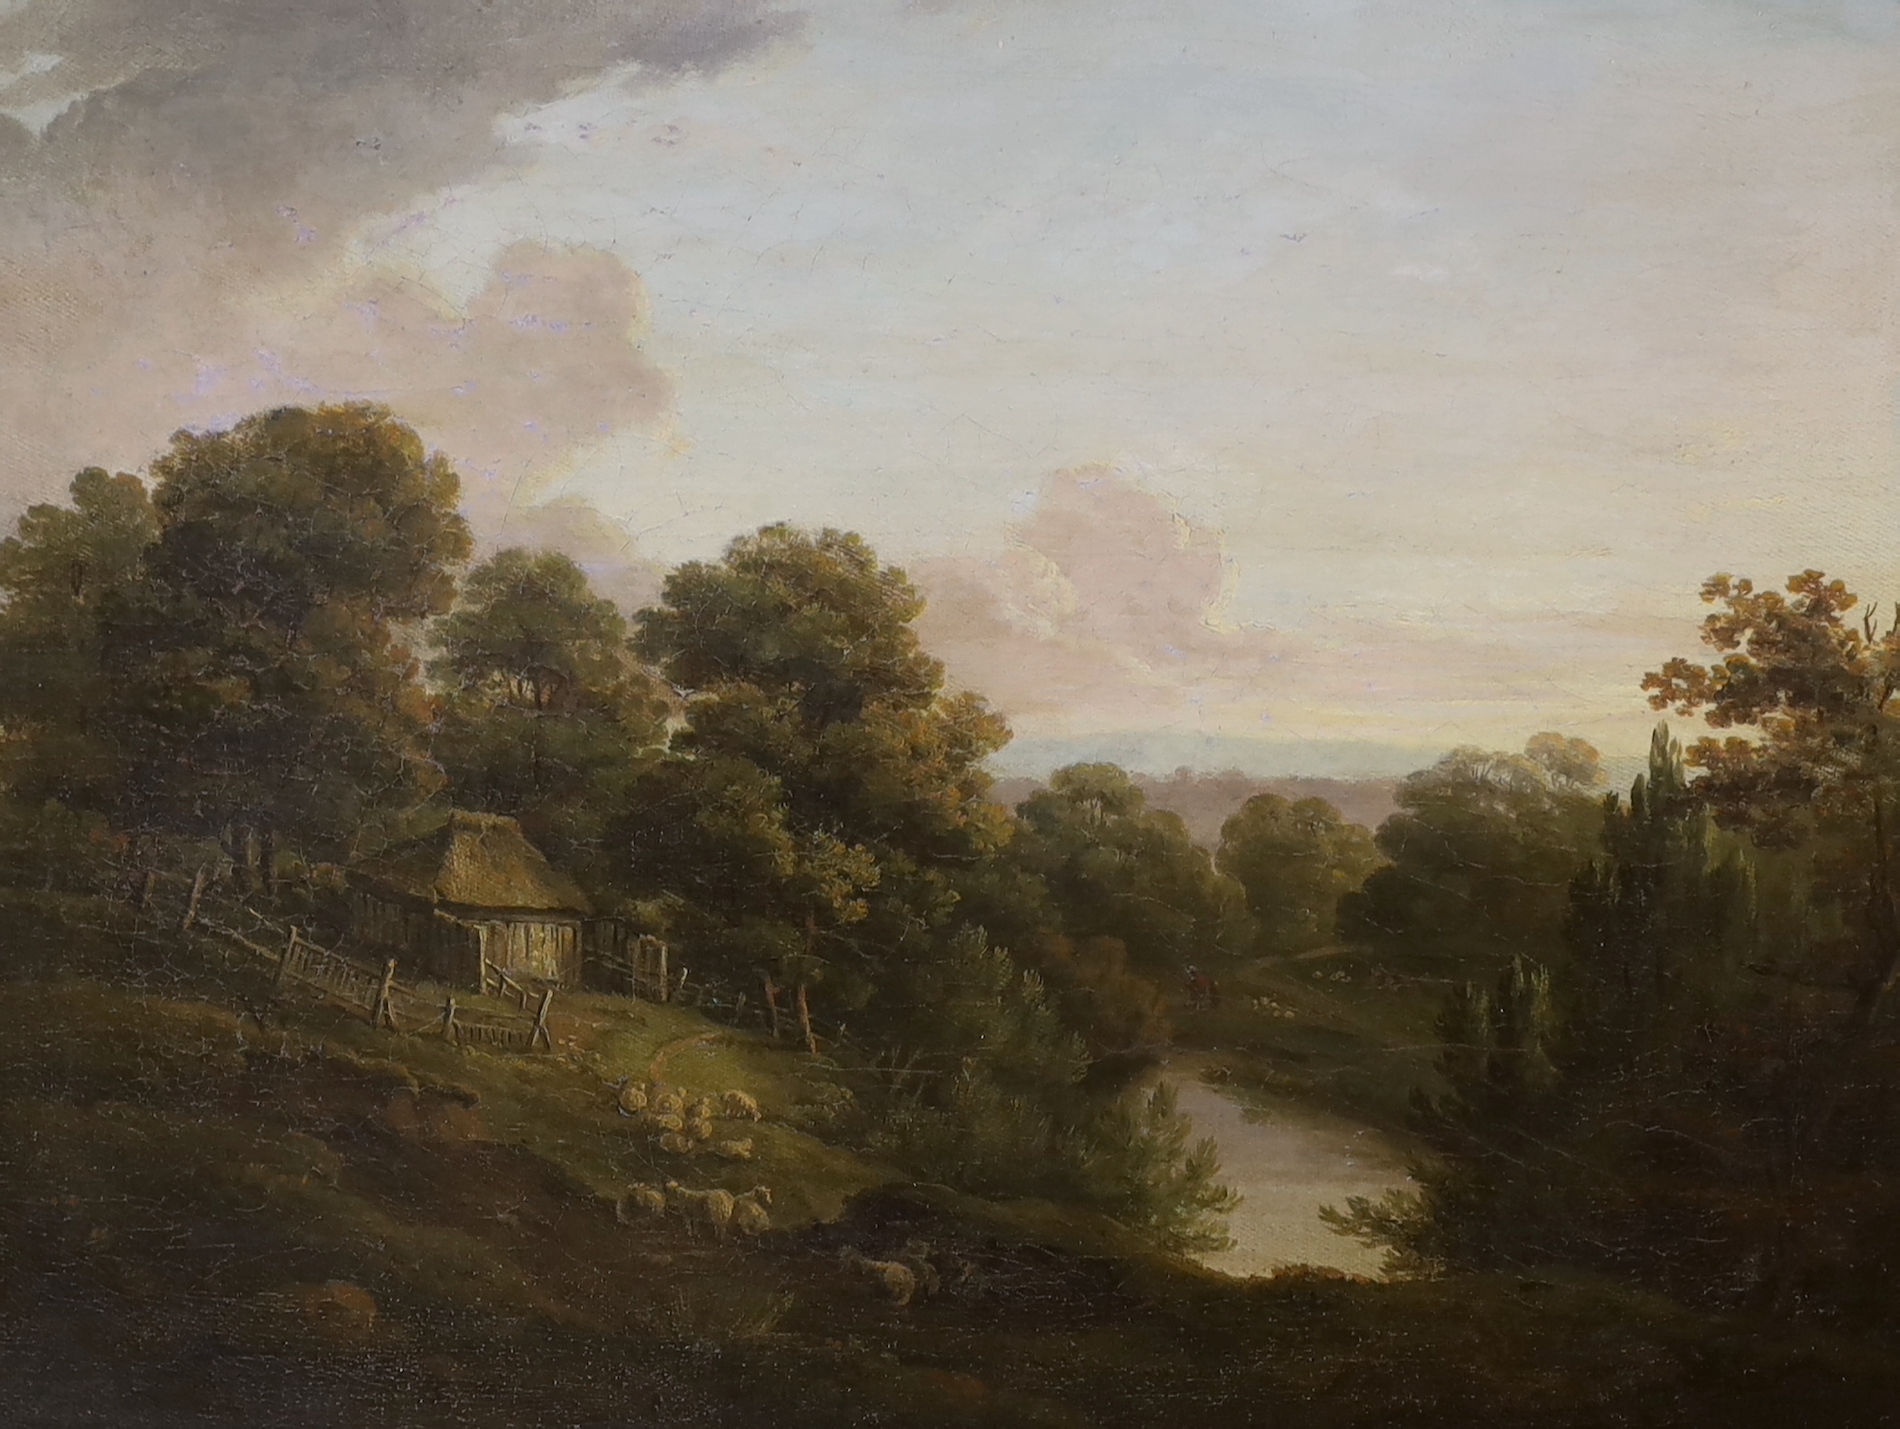 19th century, oil on canvas, Flock of sheep before a landscape, Delves House, Ringmer, Caelt Gallery